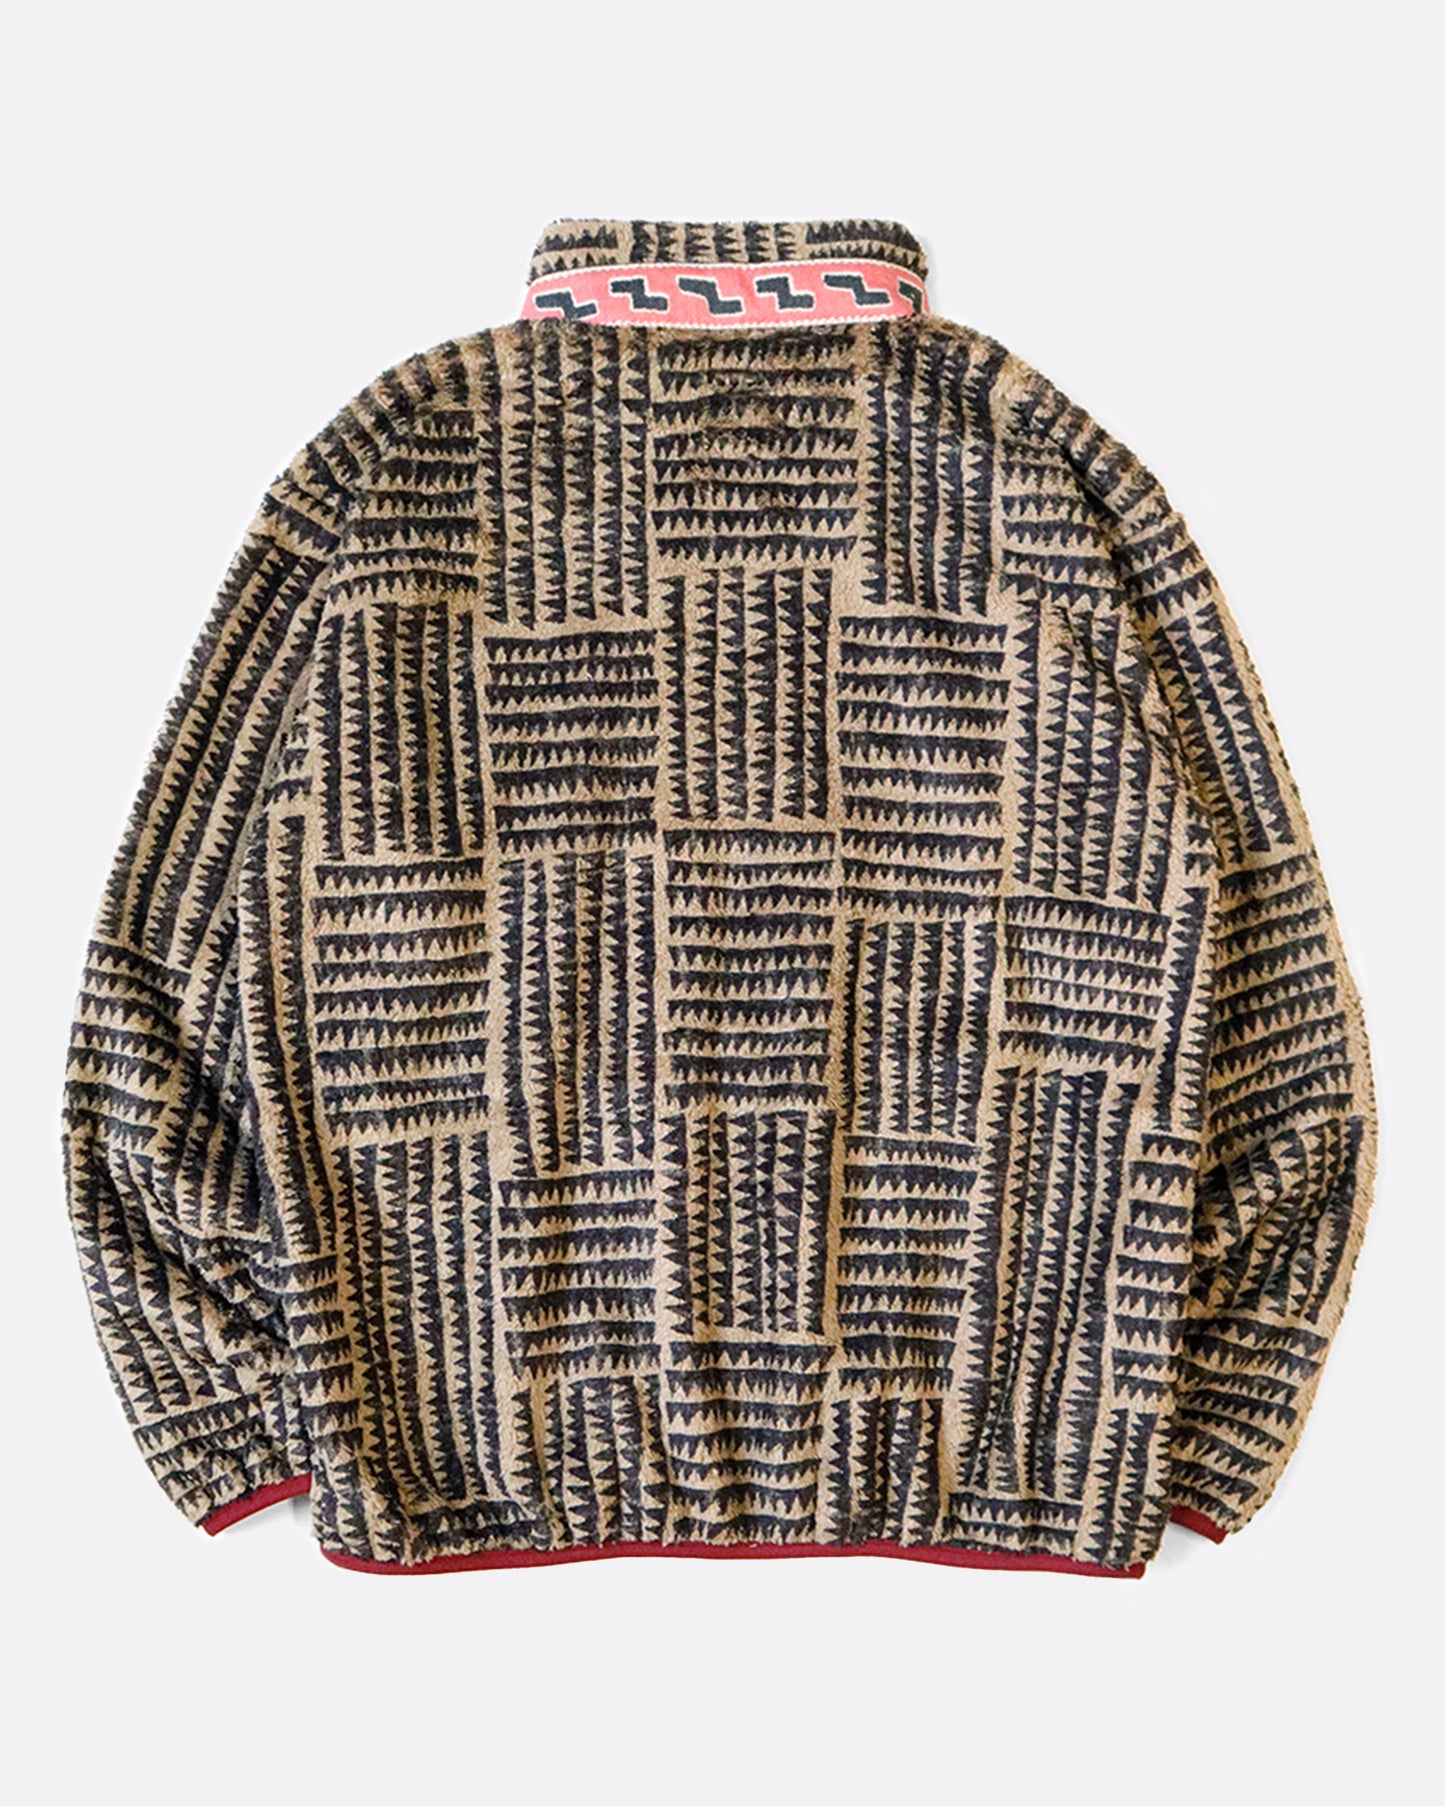 A fan favorite jacket, this time in a geometric sawtooth block pattern.